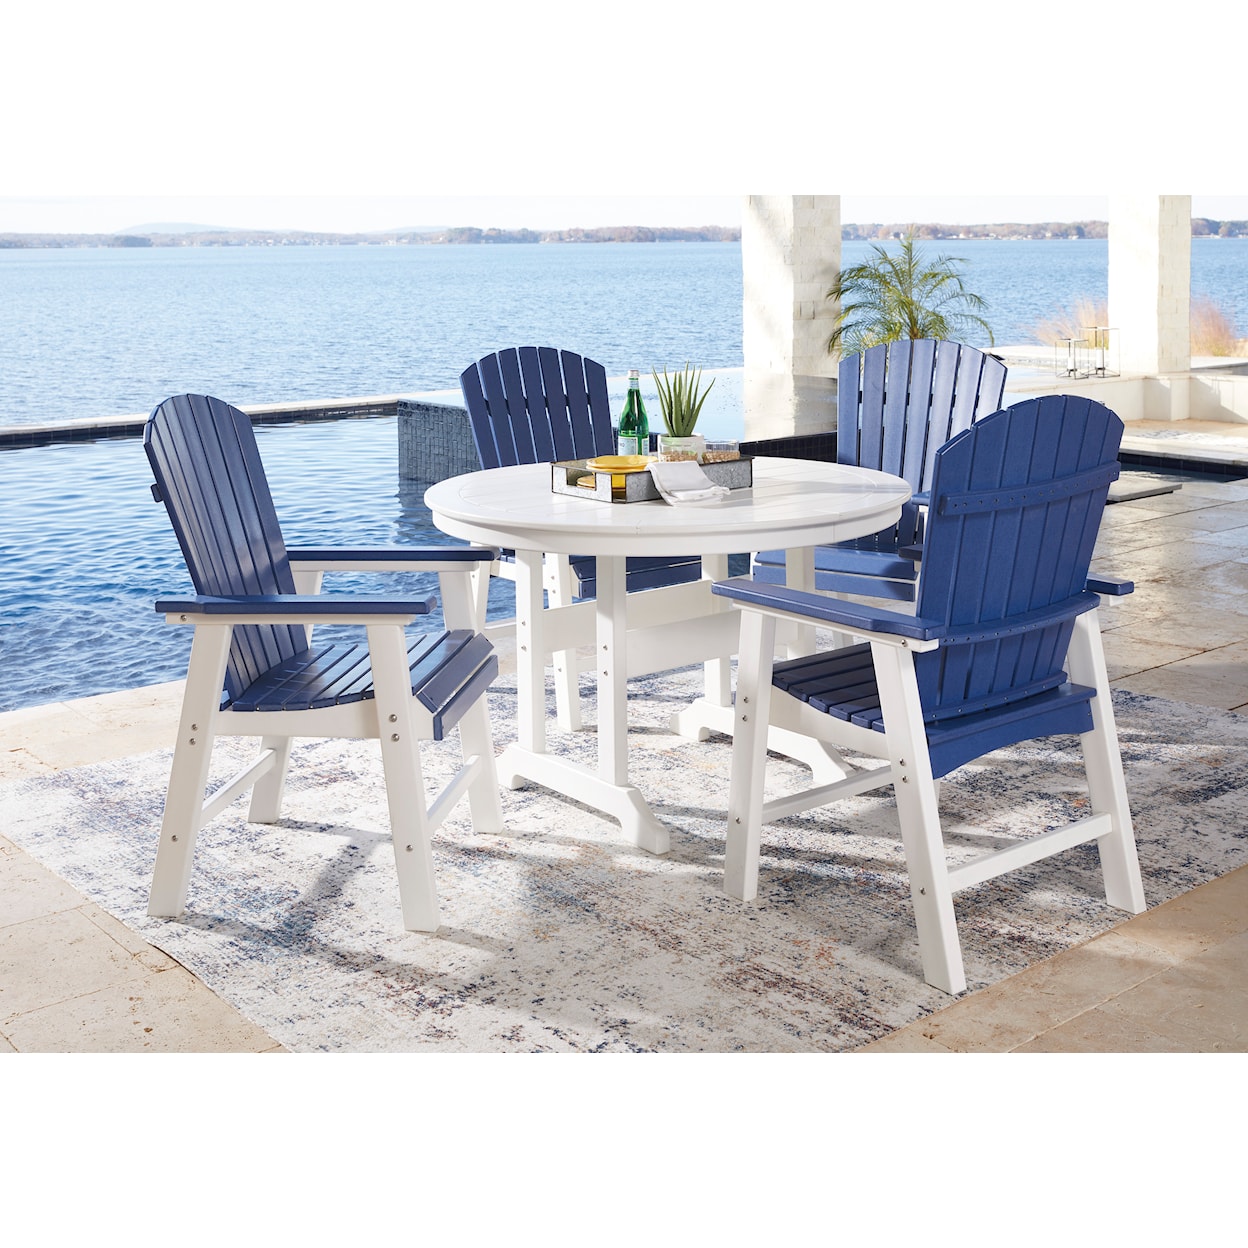 Signature Crescent Luxe Outdoor Dining Table